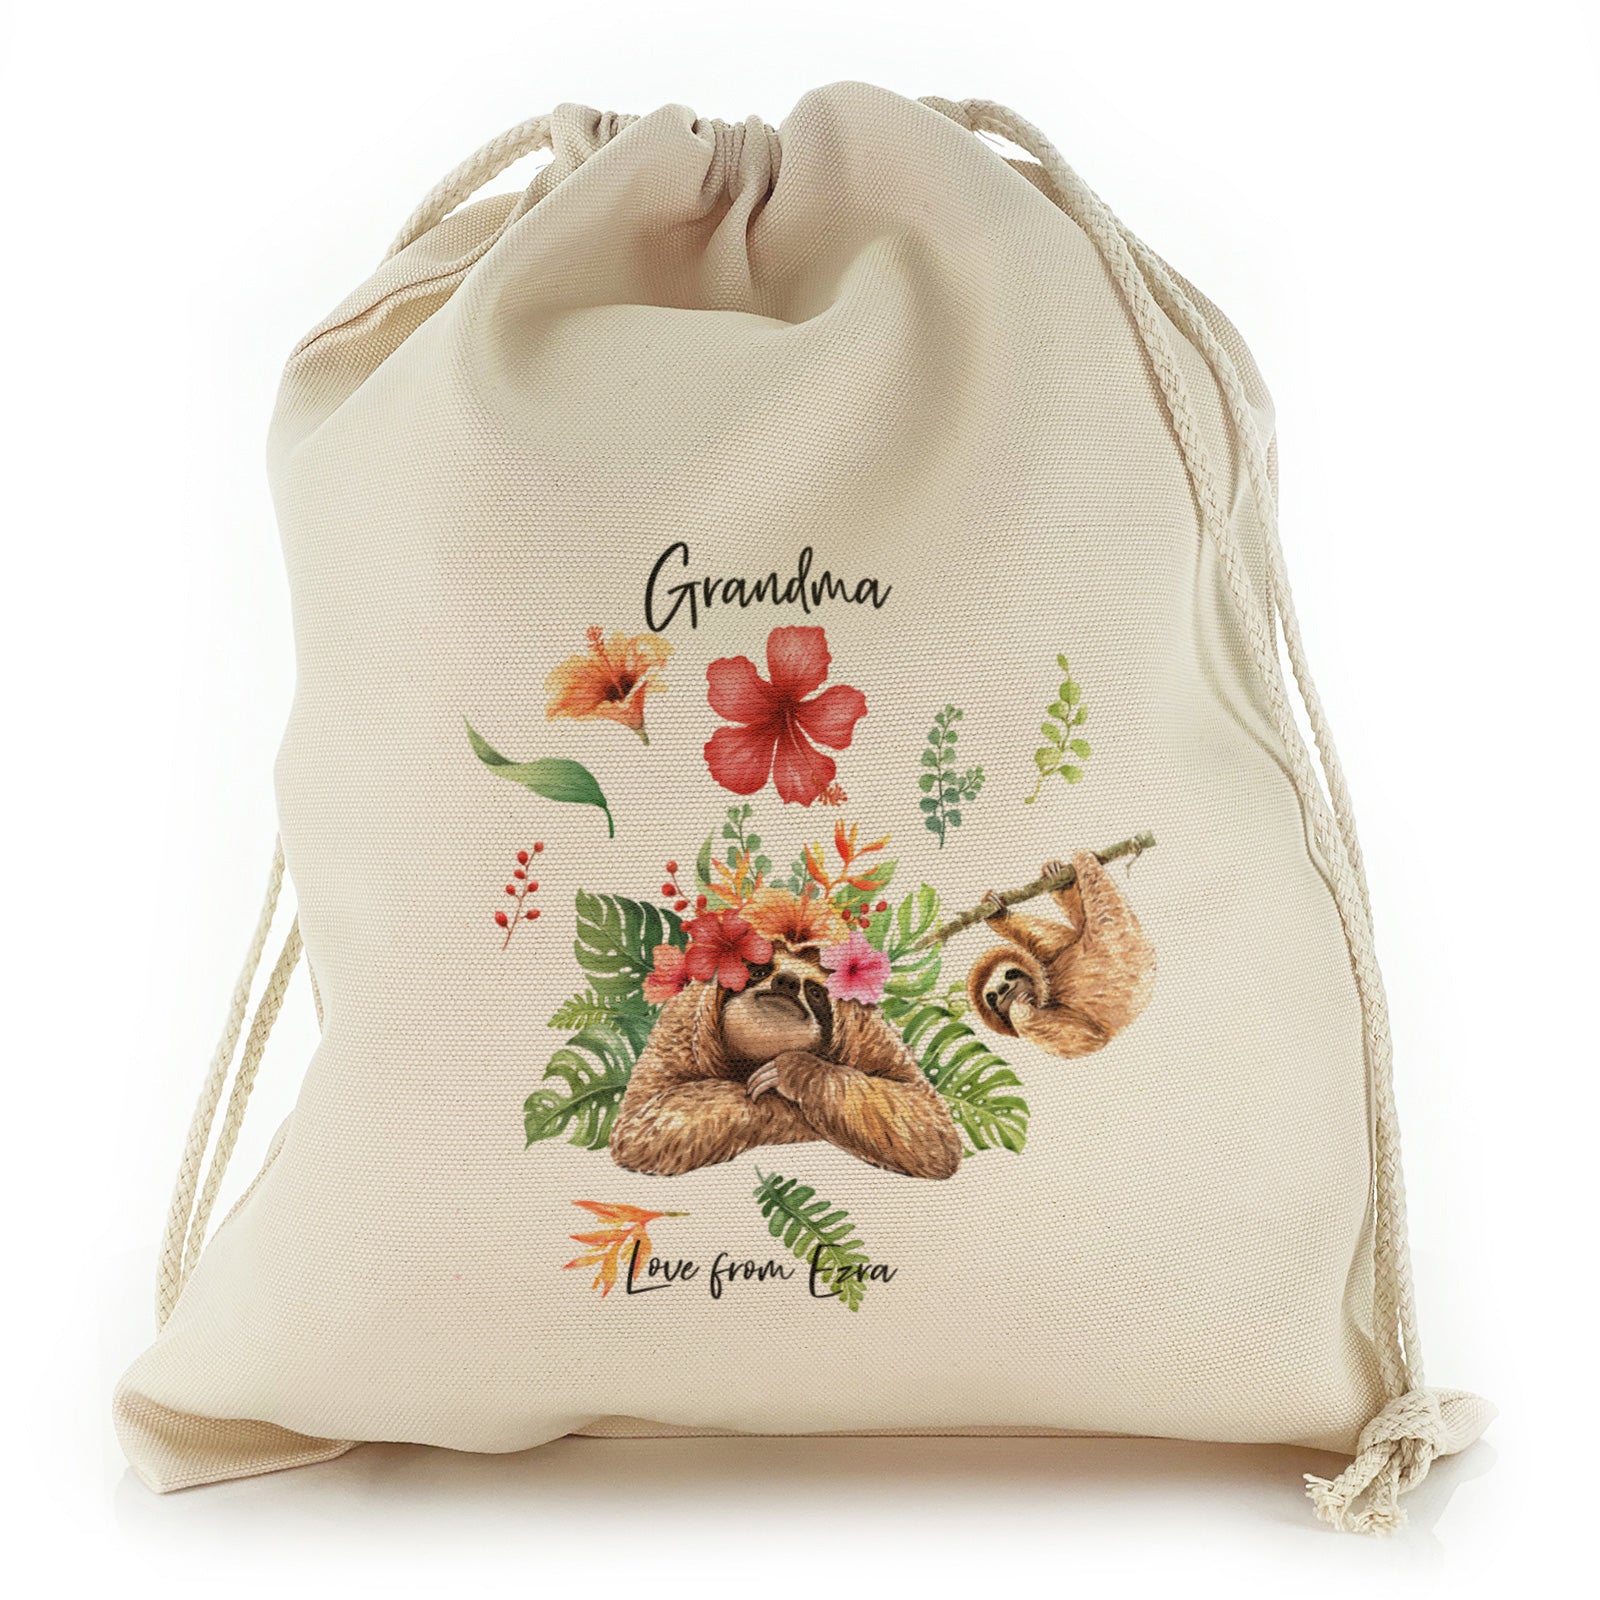 Personalised Canvas Sack with Stylish Text and Floral Mum and Baby Sloths